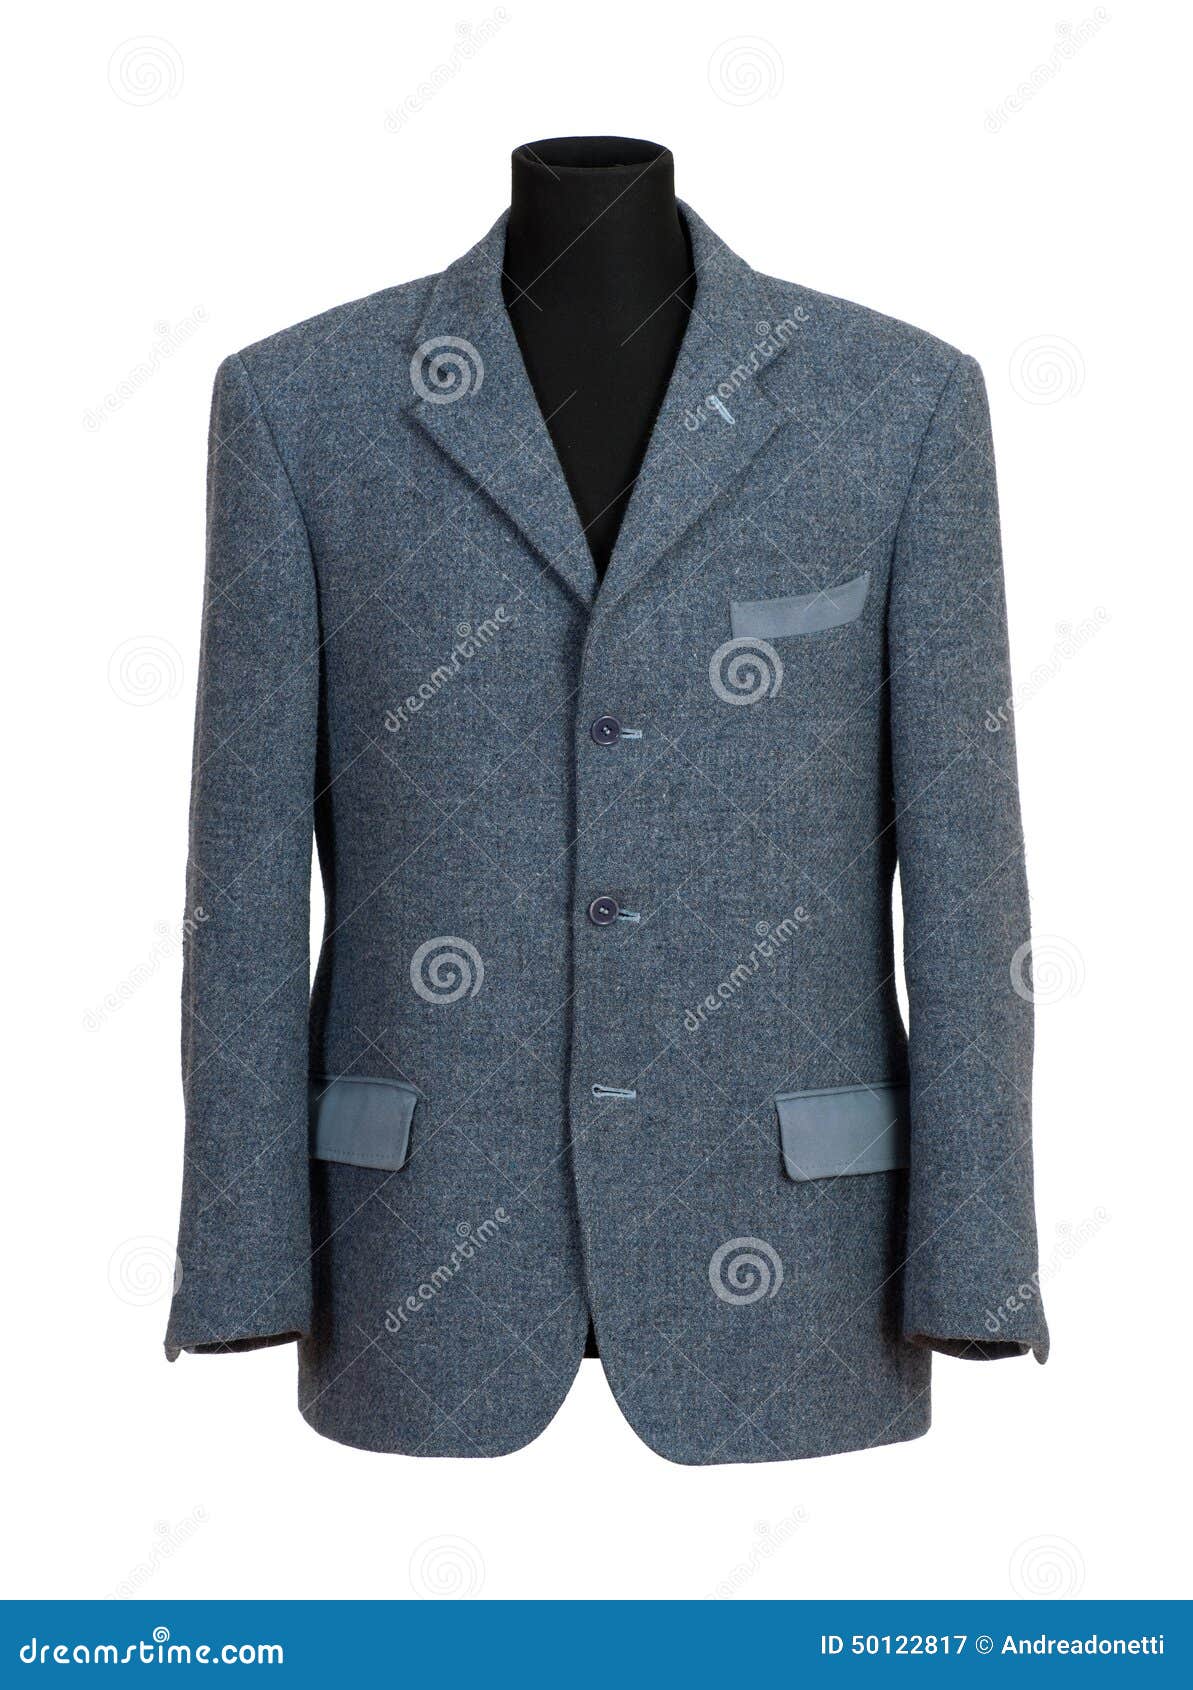 Mannequin in Elegant Gray Business Suit Stock Image - Image of business ...